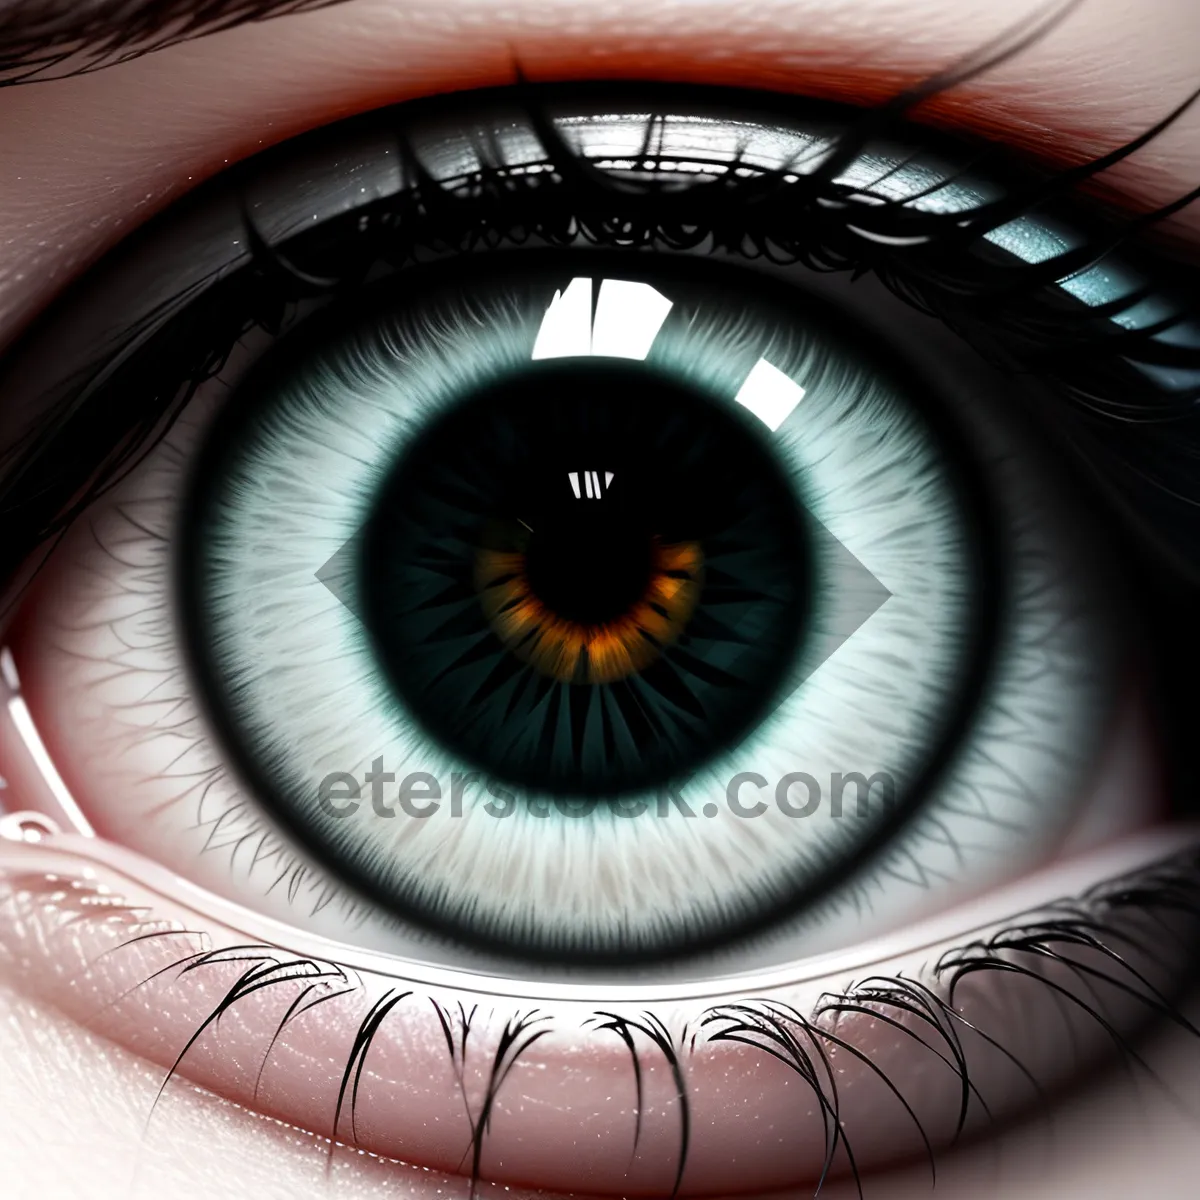 Picture of Eyebrow Design on Digital Light Circle Pattern